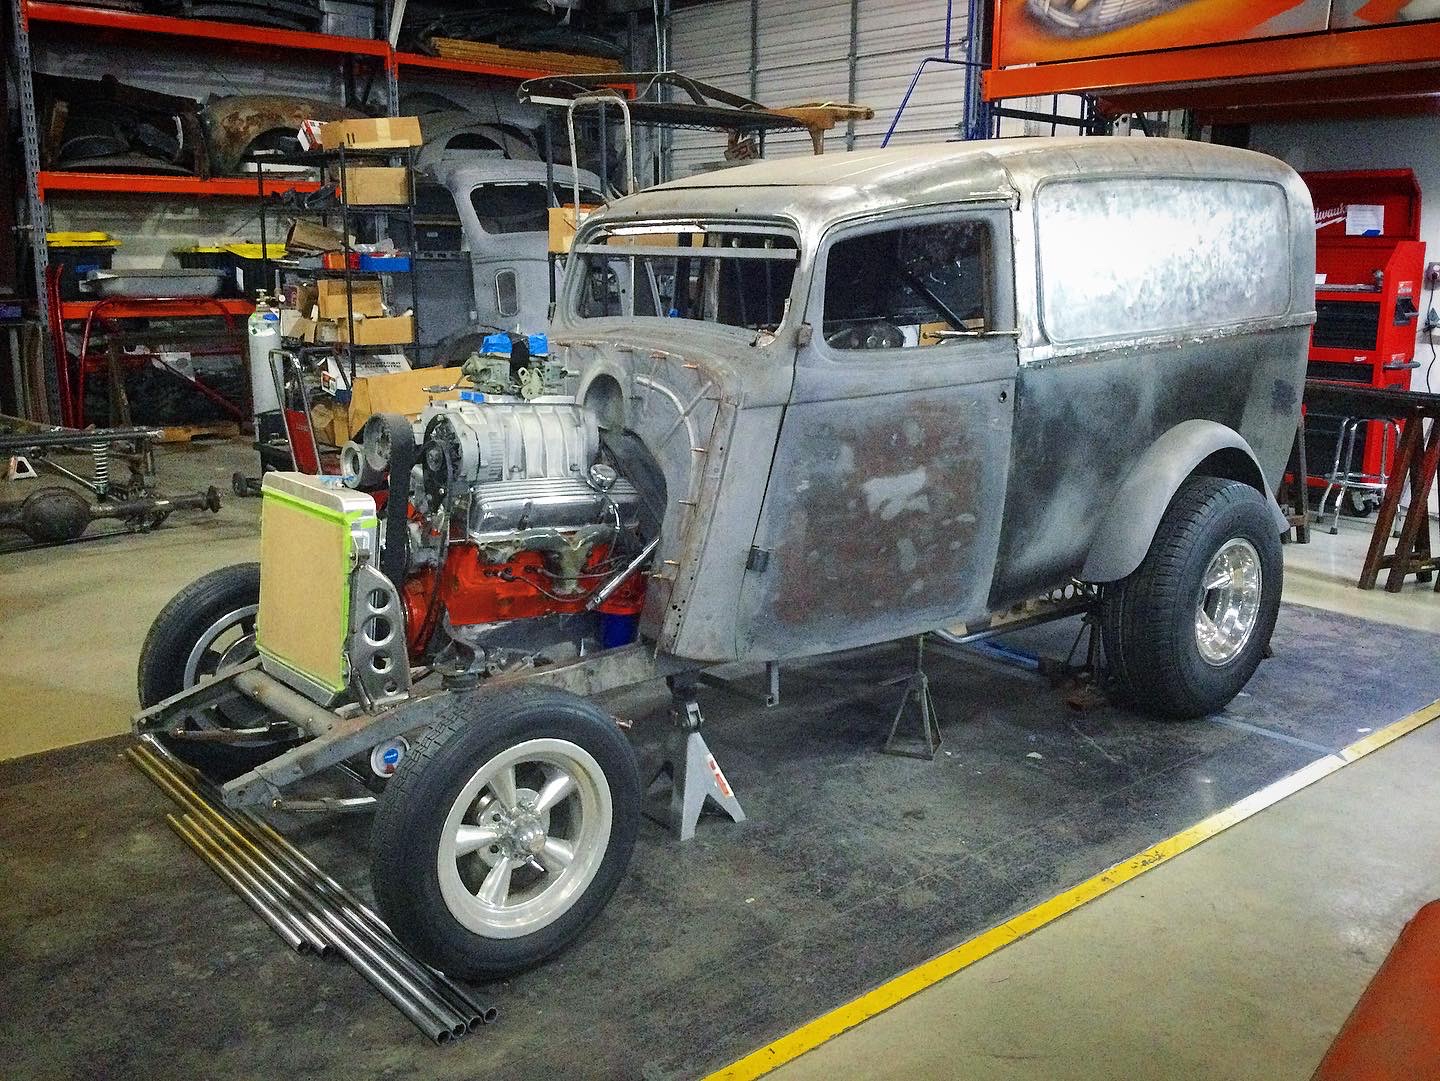 Profile view of Willys Gasser's side